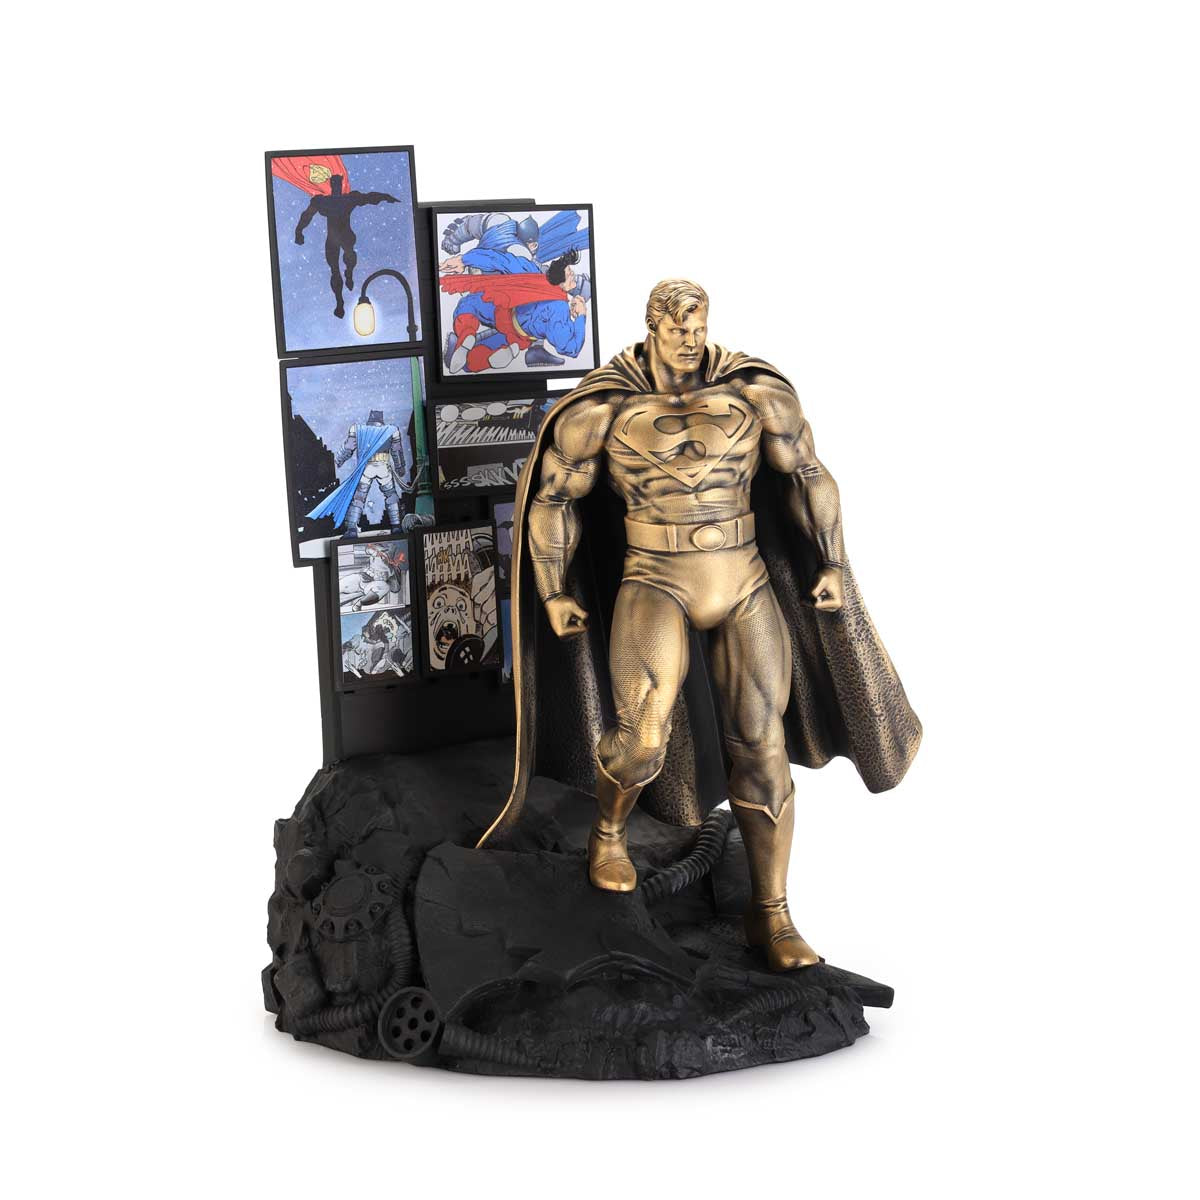 Superman The Dark Knight Returns Limited Edition Figurine - Collectible Gift Statue